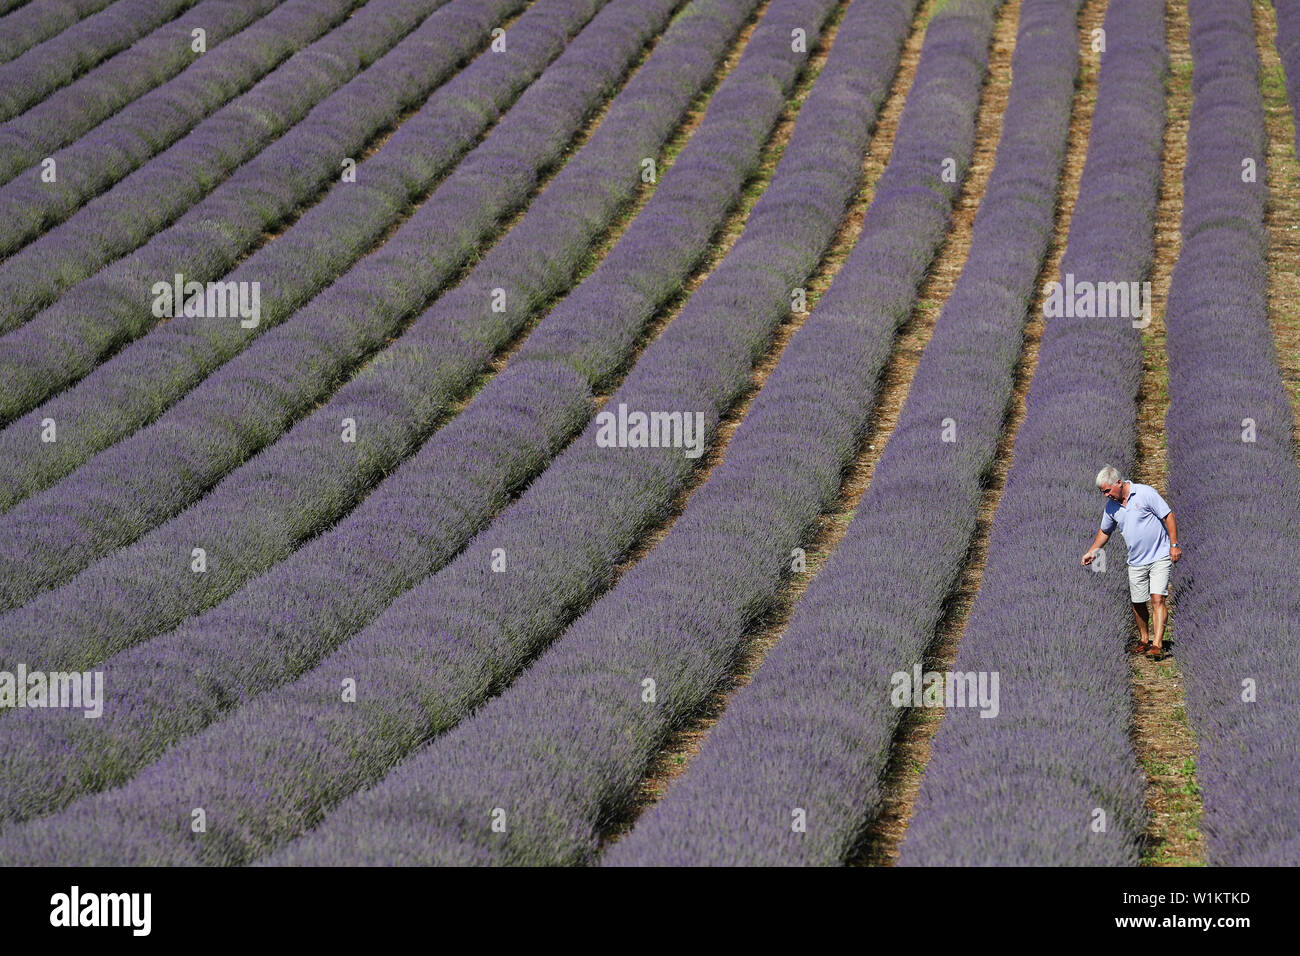 Andrew Elms, owner of Lordington Lavender in West Sussex, inspects the rows of lavender ahead of their open week next week, running from 8th to 14th July. Stock Photo